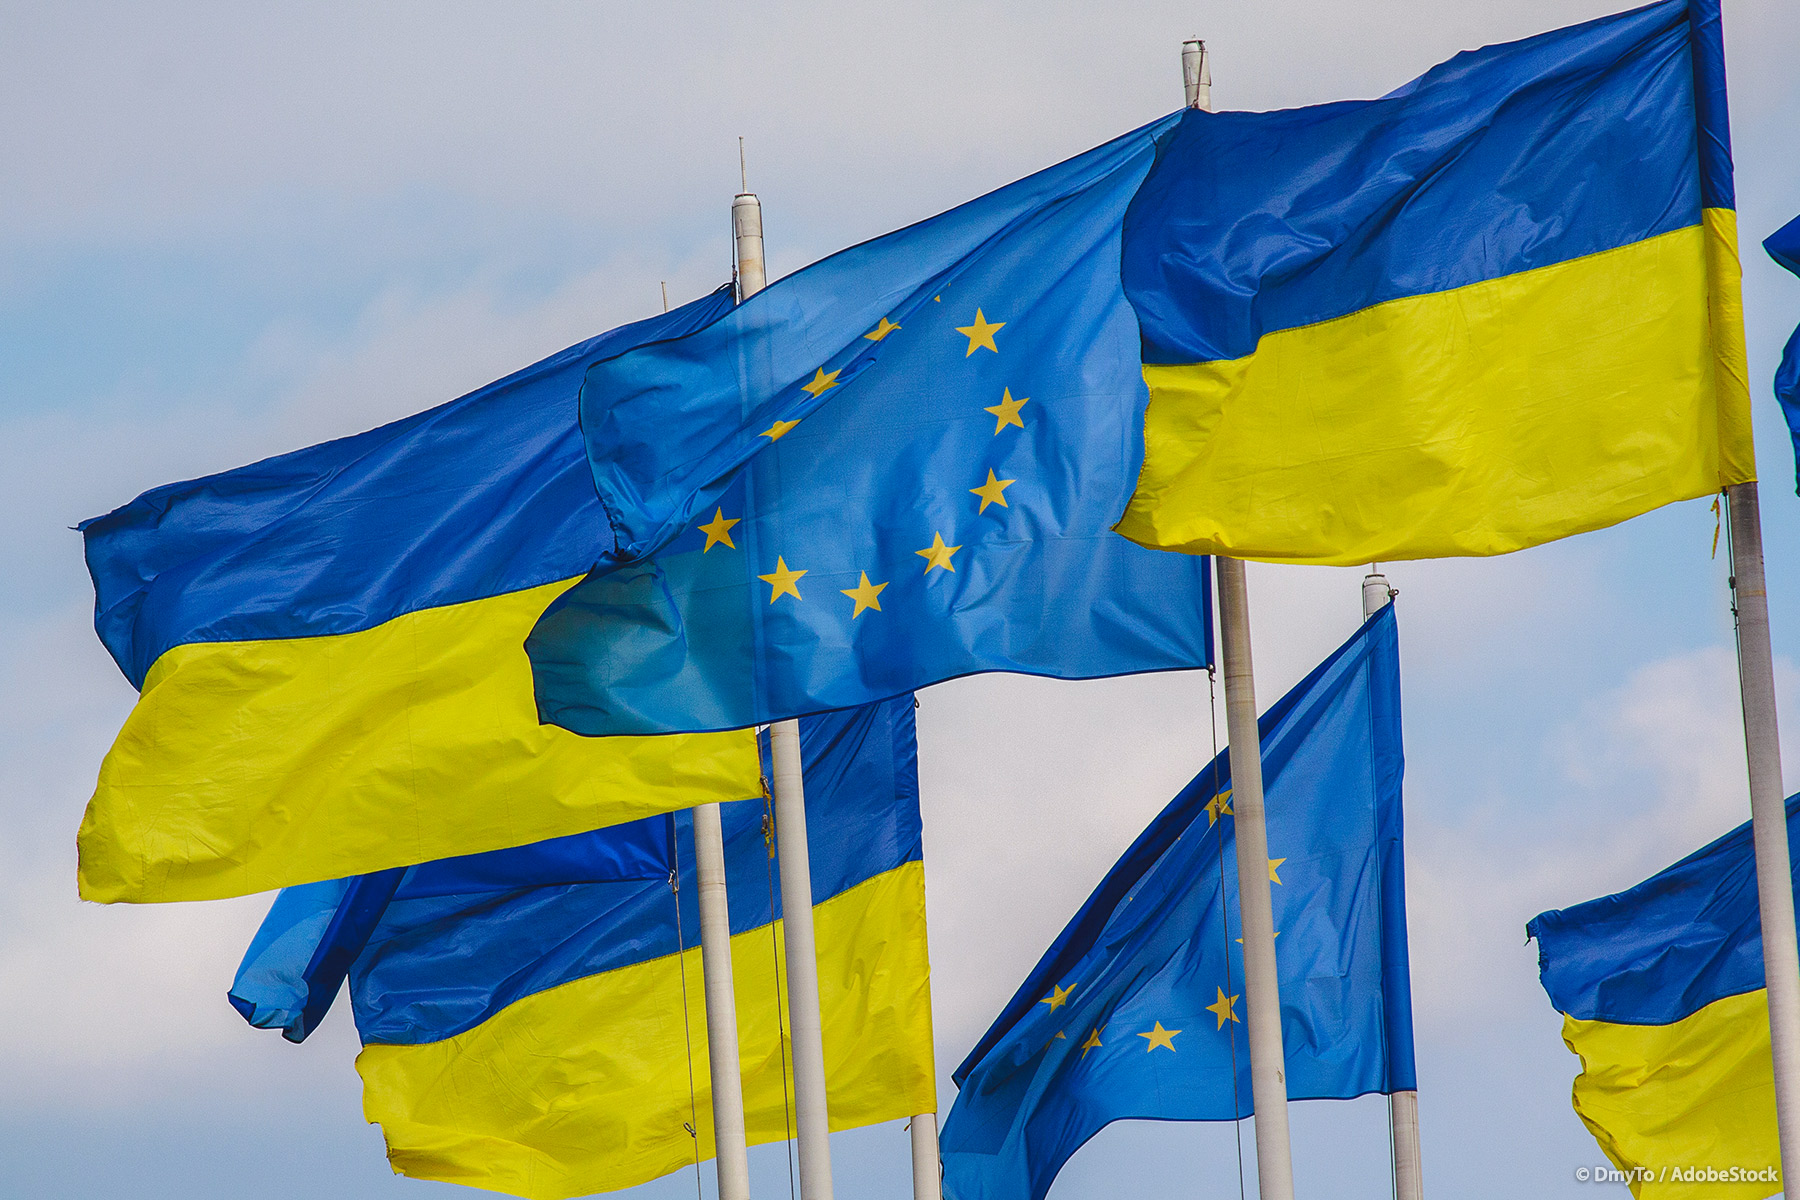 The Greatest Challenges to Ukraine’s Accession to the European Union